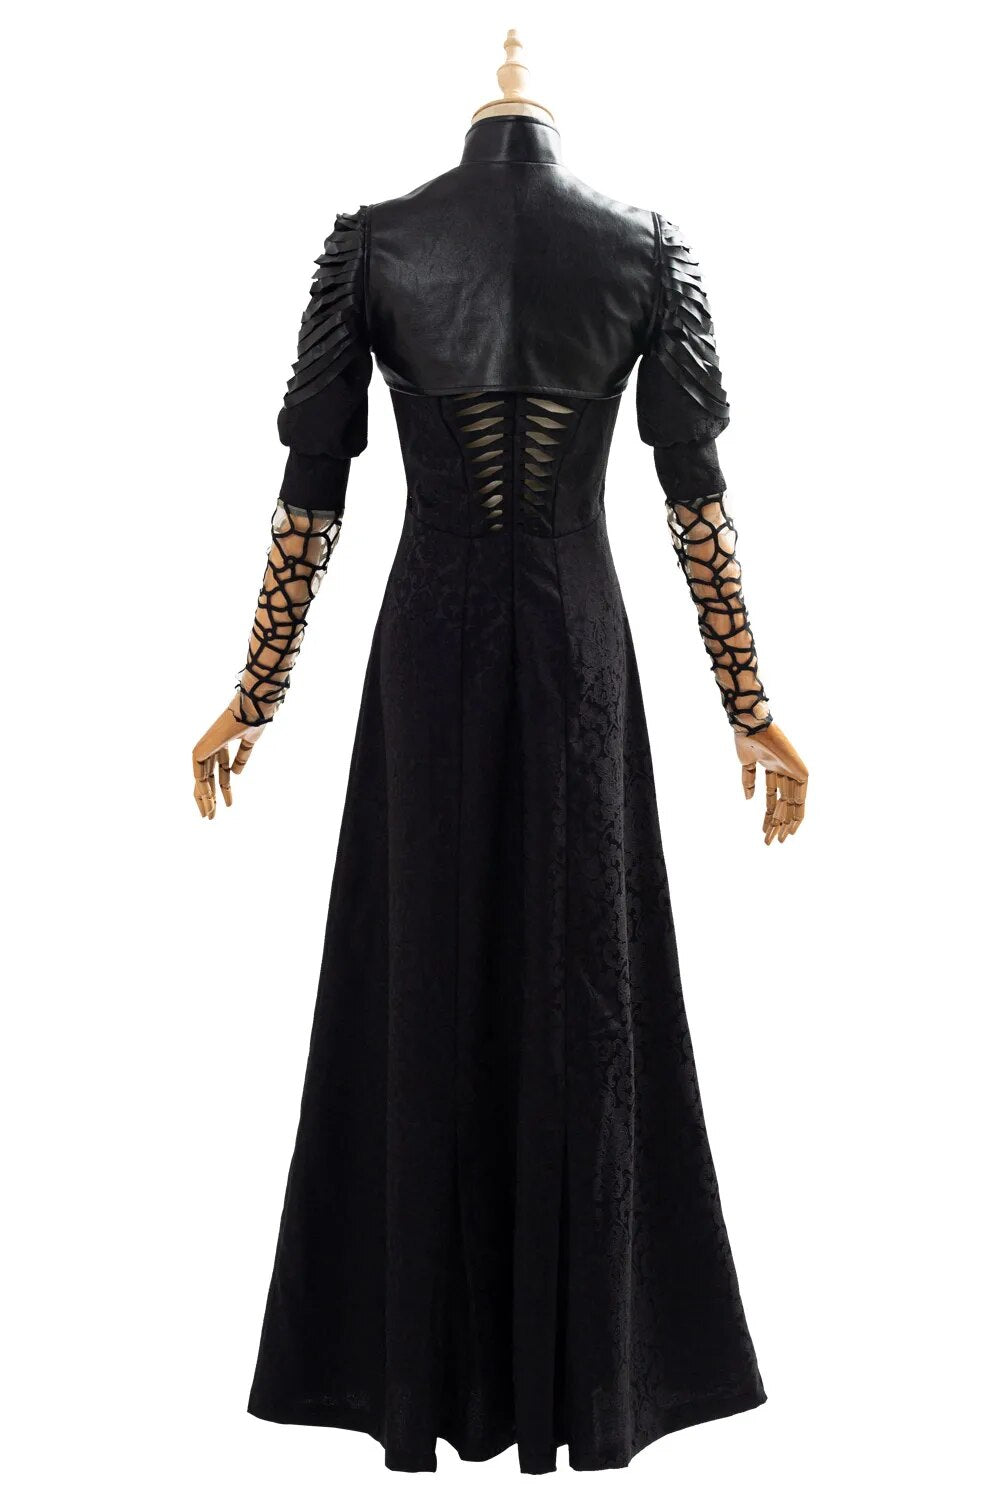 Yennefer Cosplay Costume Movie Wizard Women Dress Cape Outfits Halloween Party Clothes For Ladies Role Play Fashion New